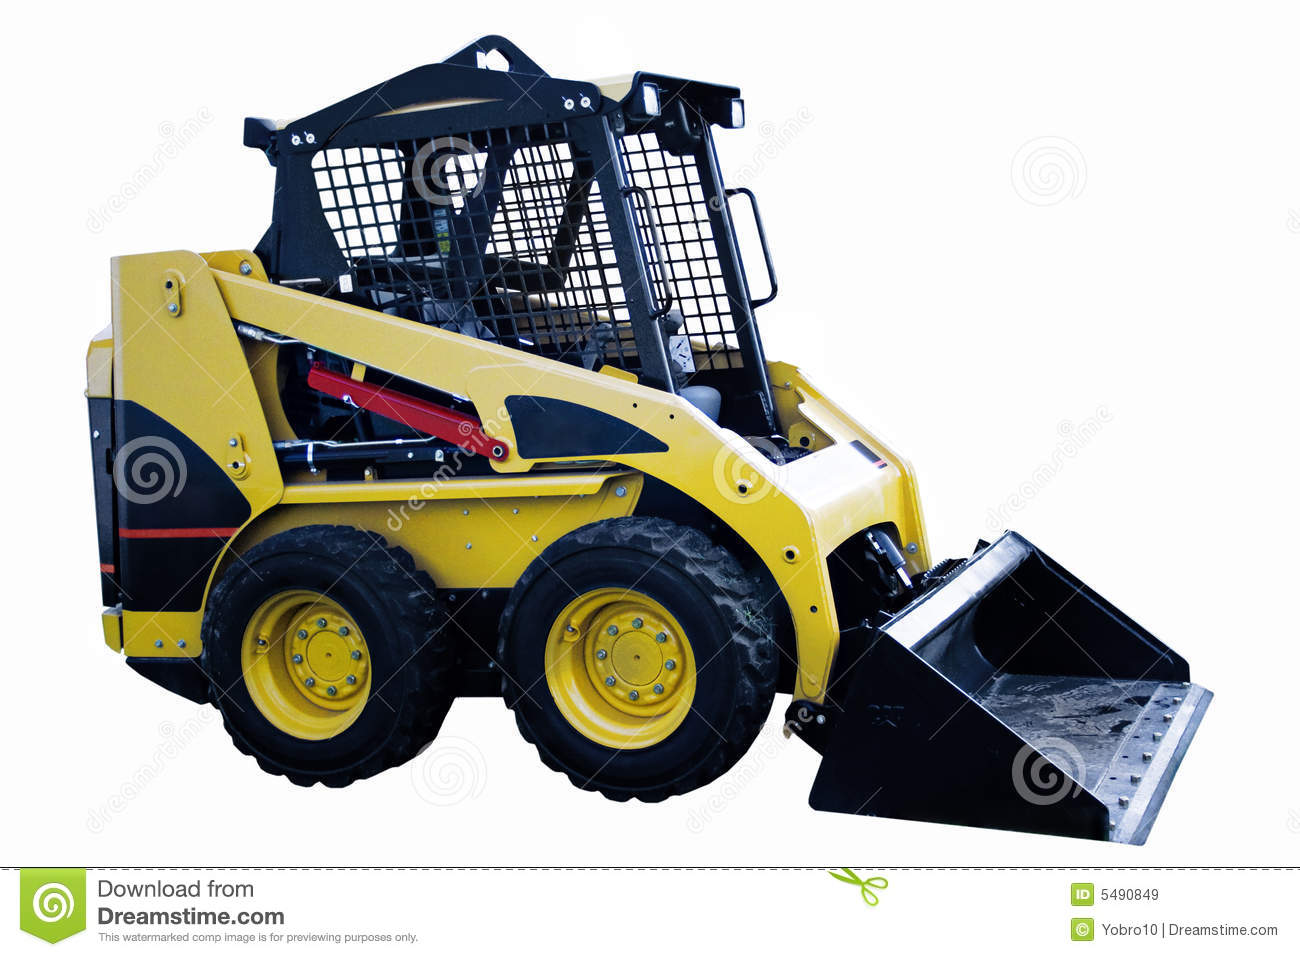 Yellow Skid Loader Or Bobcat Construction Equipment Isolated On A